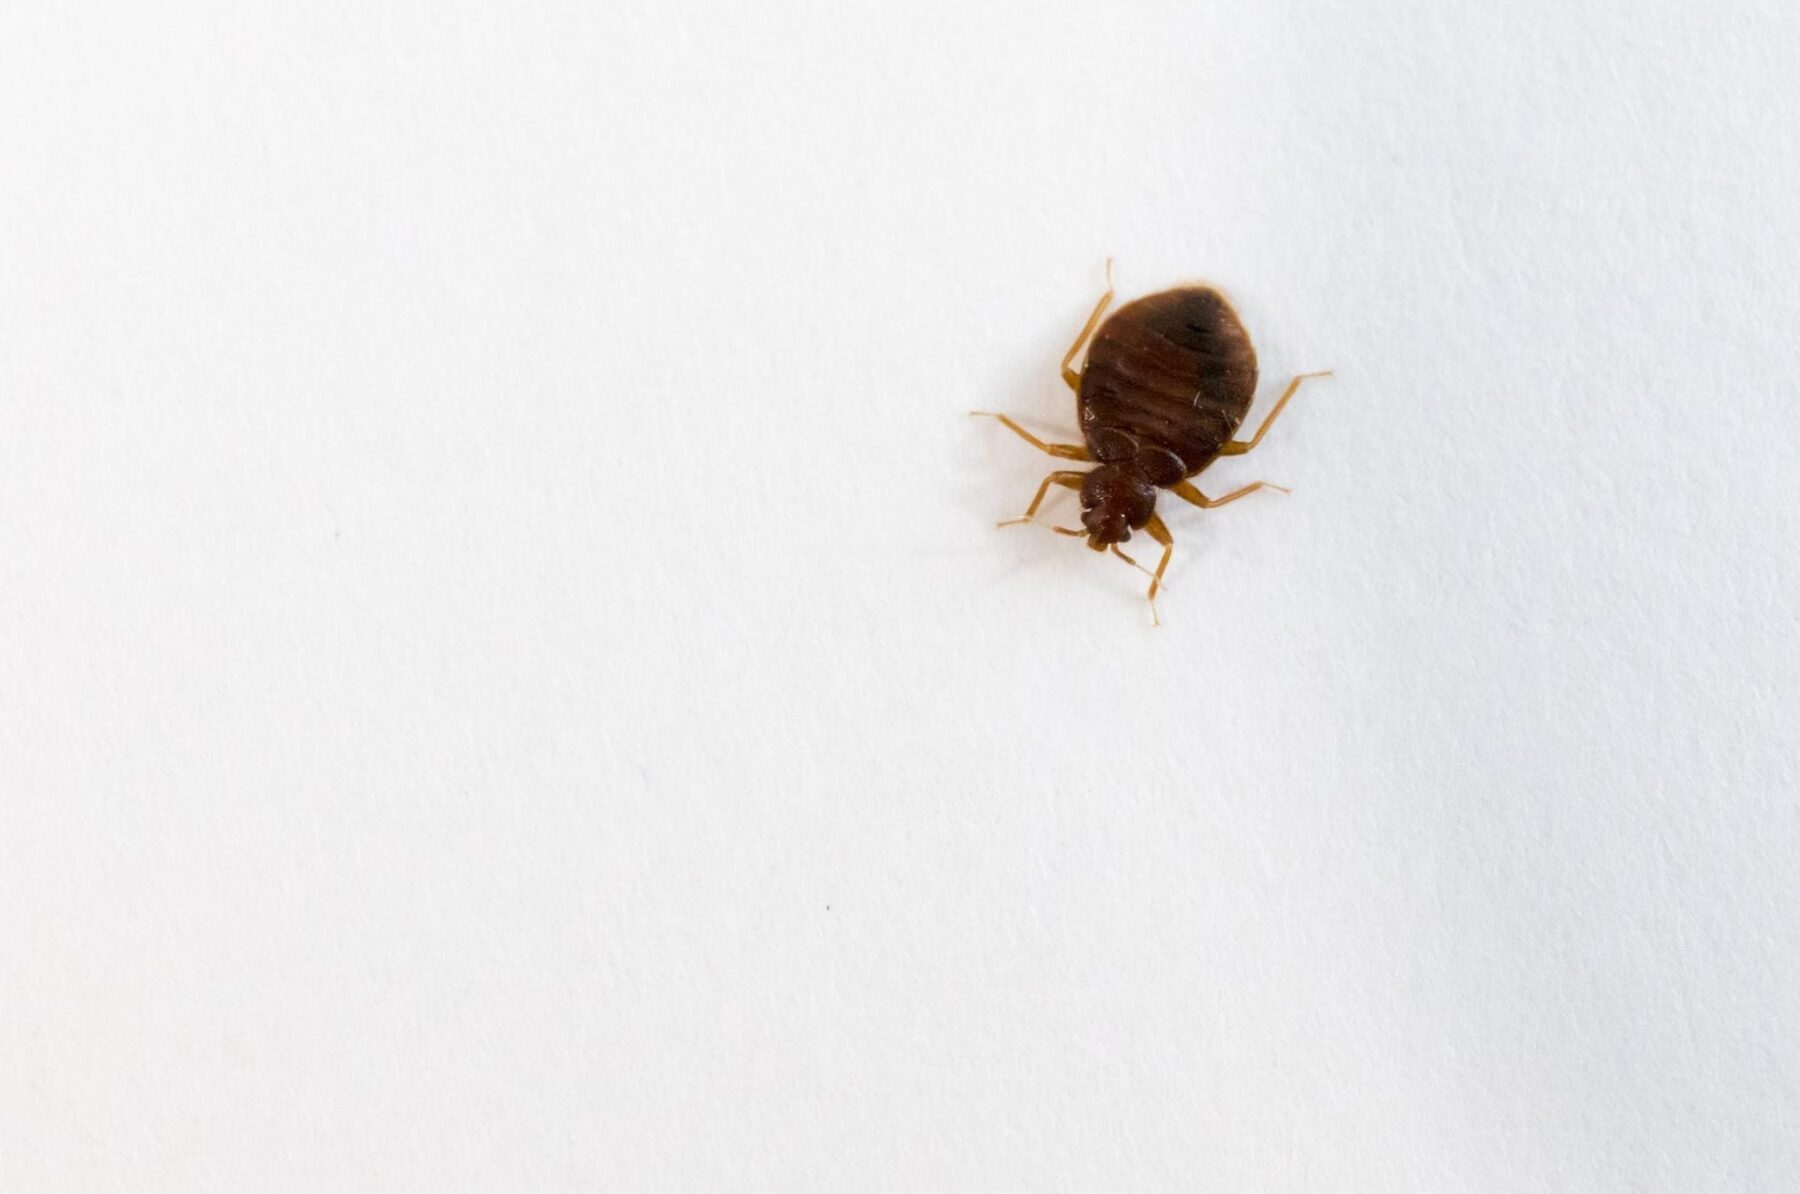 Top view of a bed bug on white background